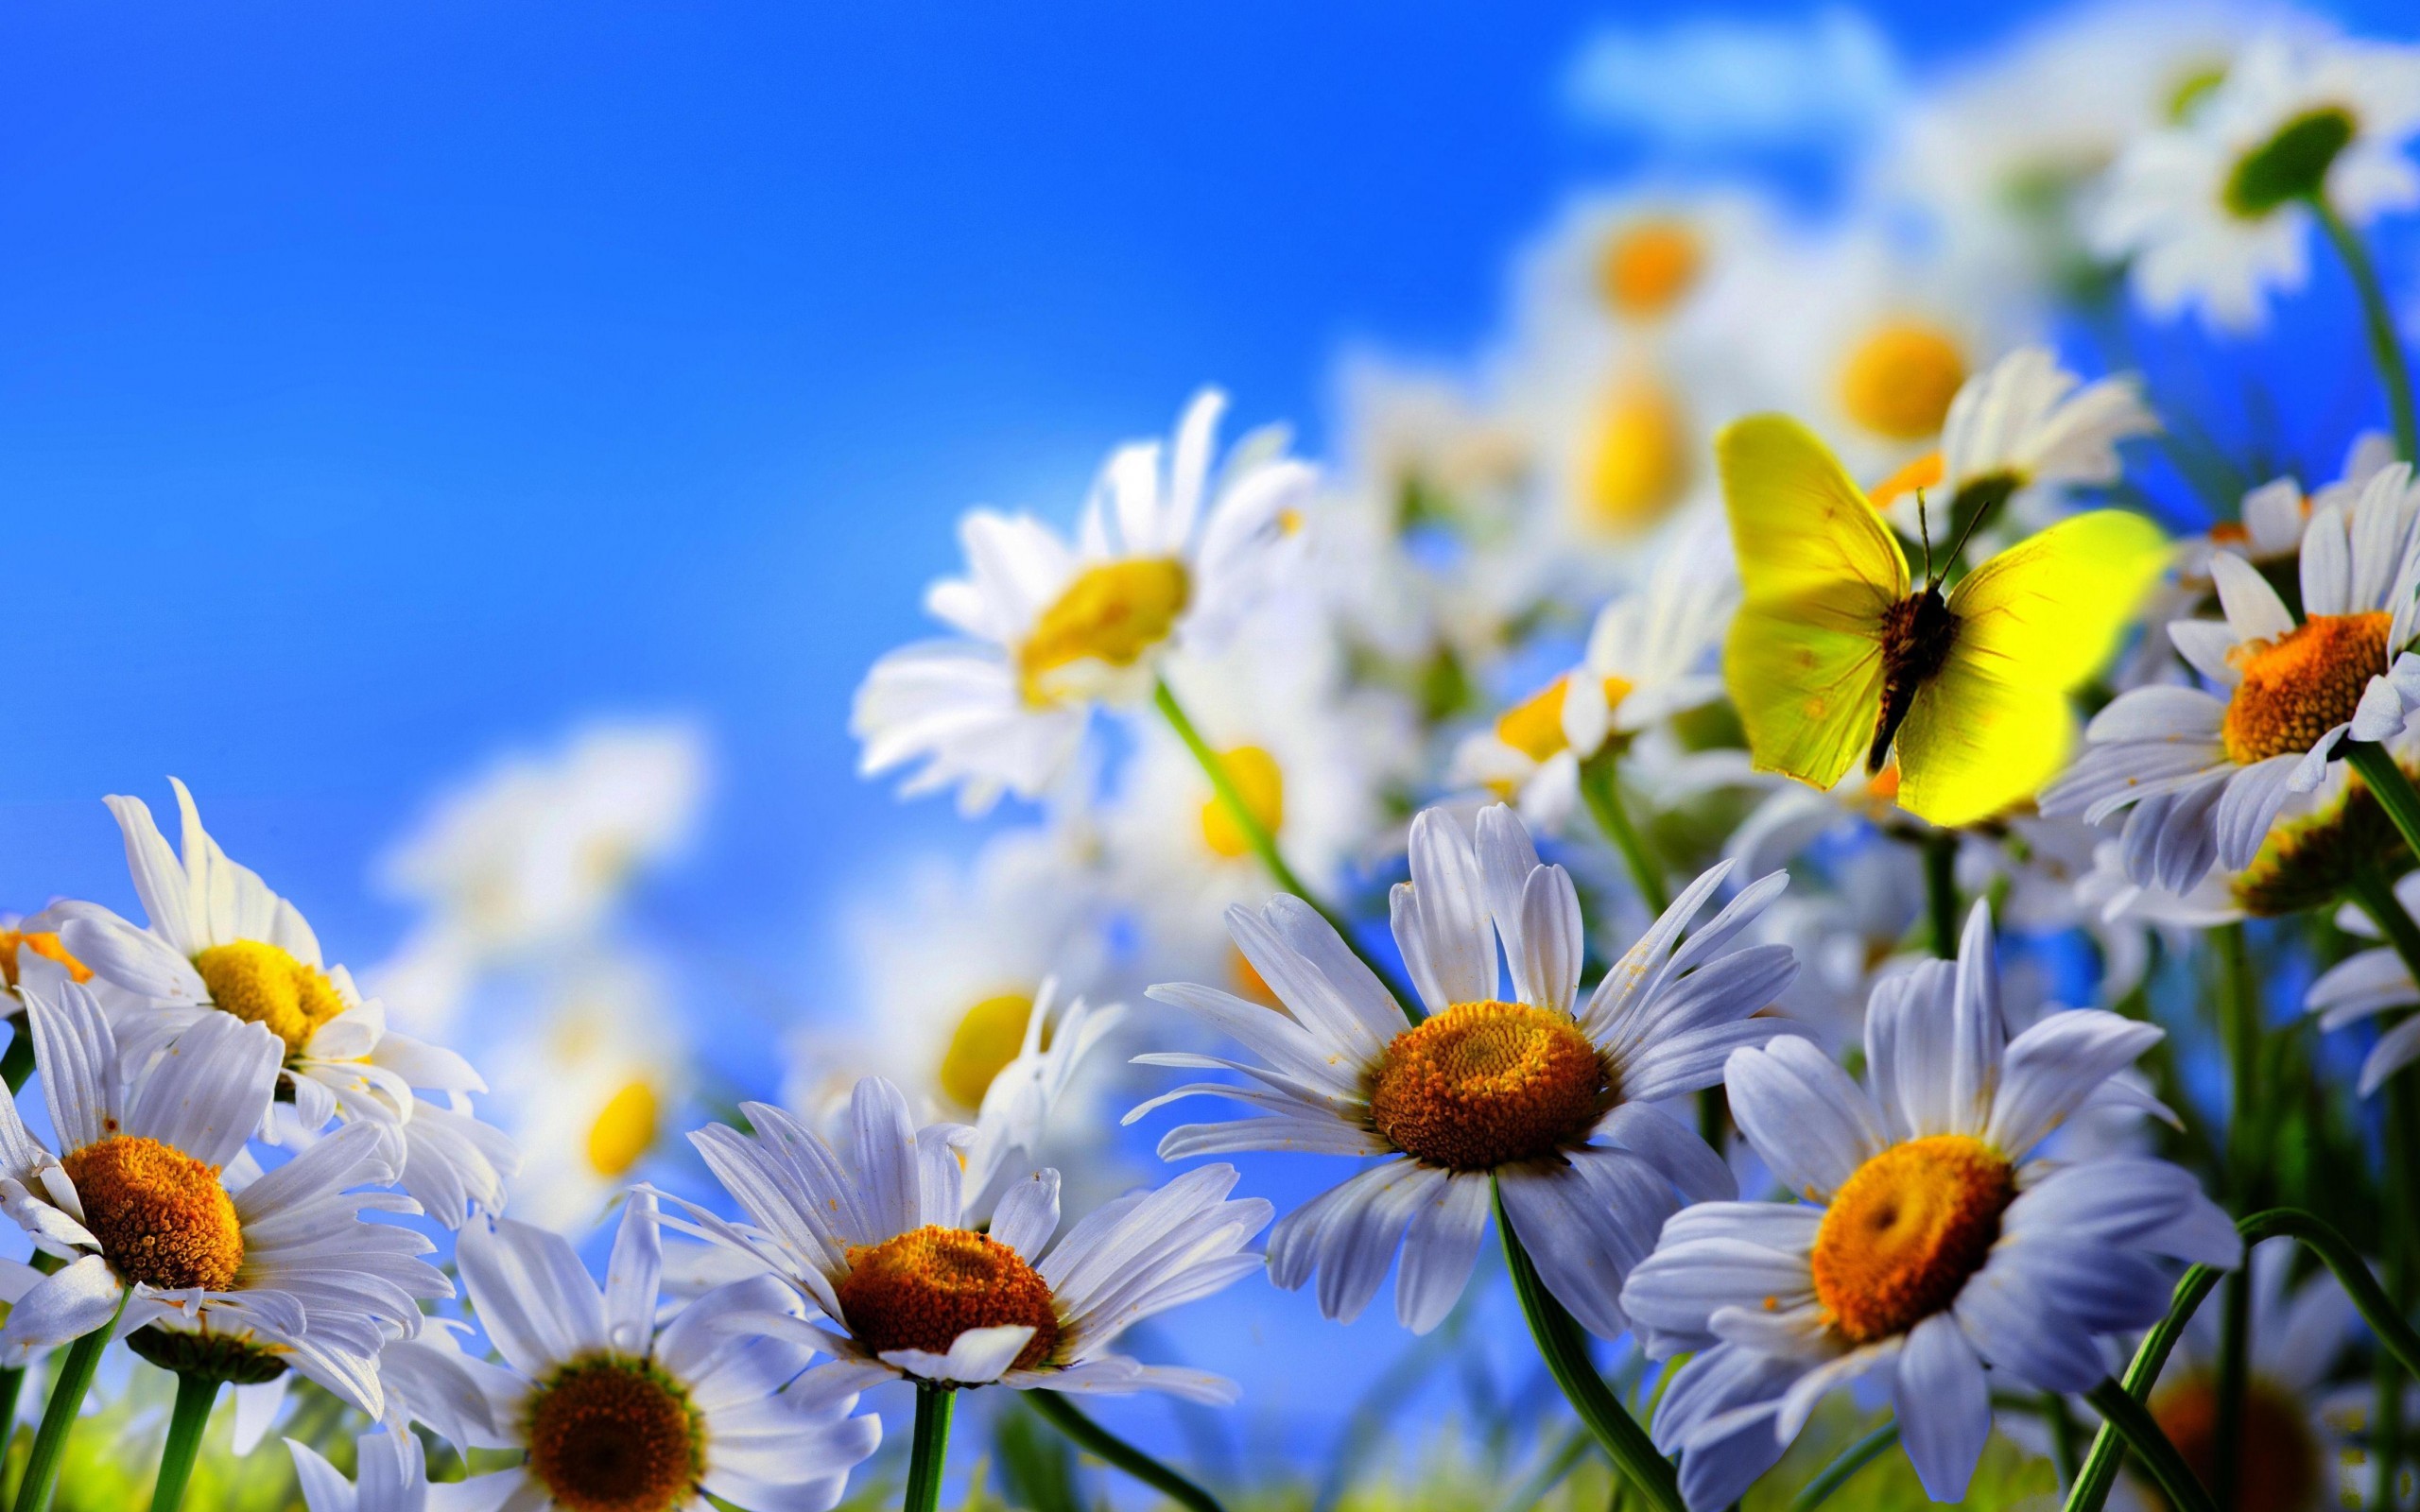 Widescreen image flowers, butterflies, plants, insects